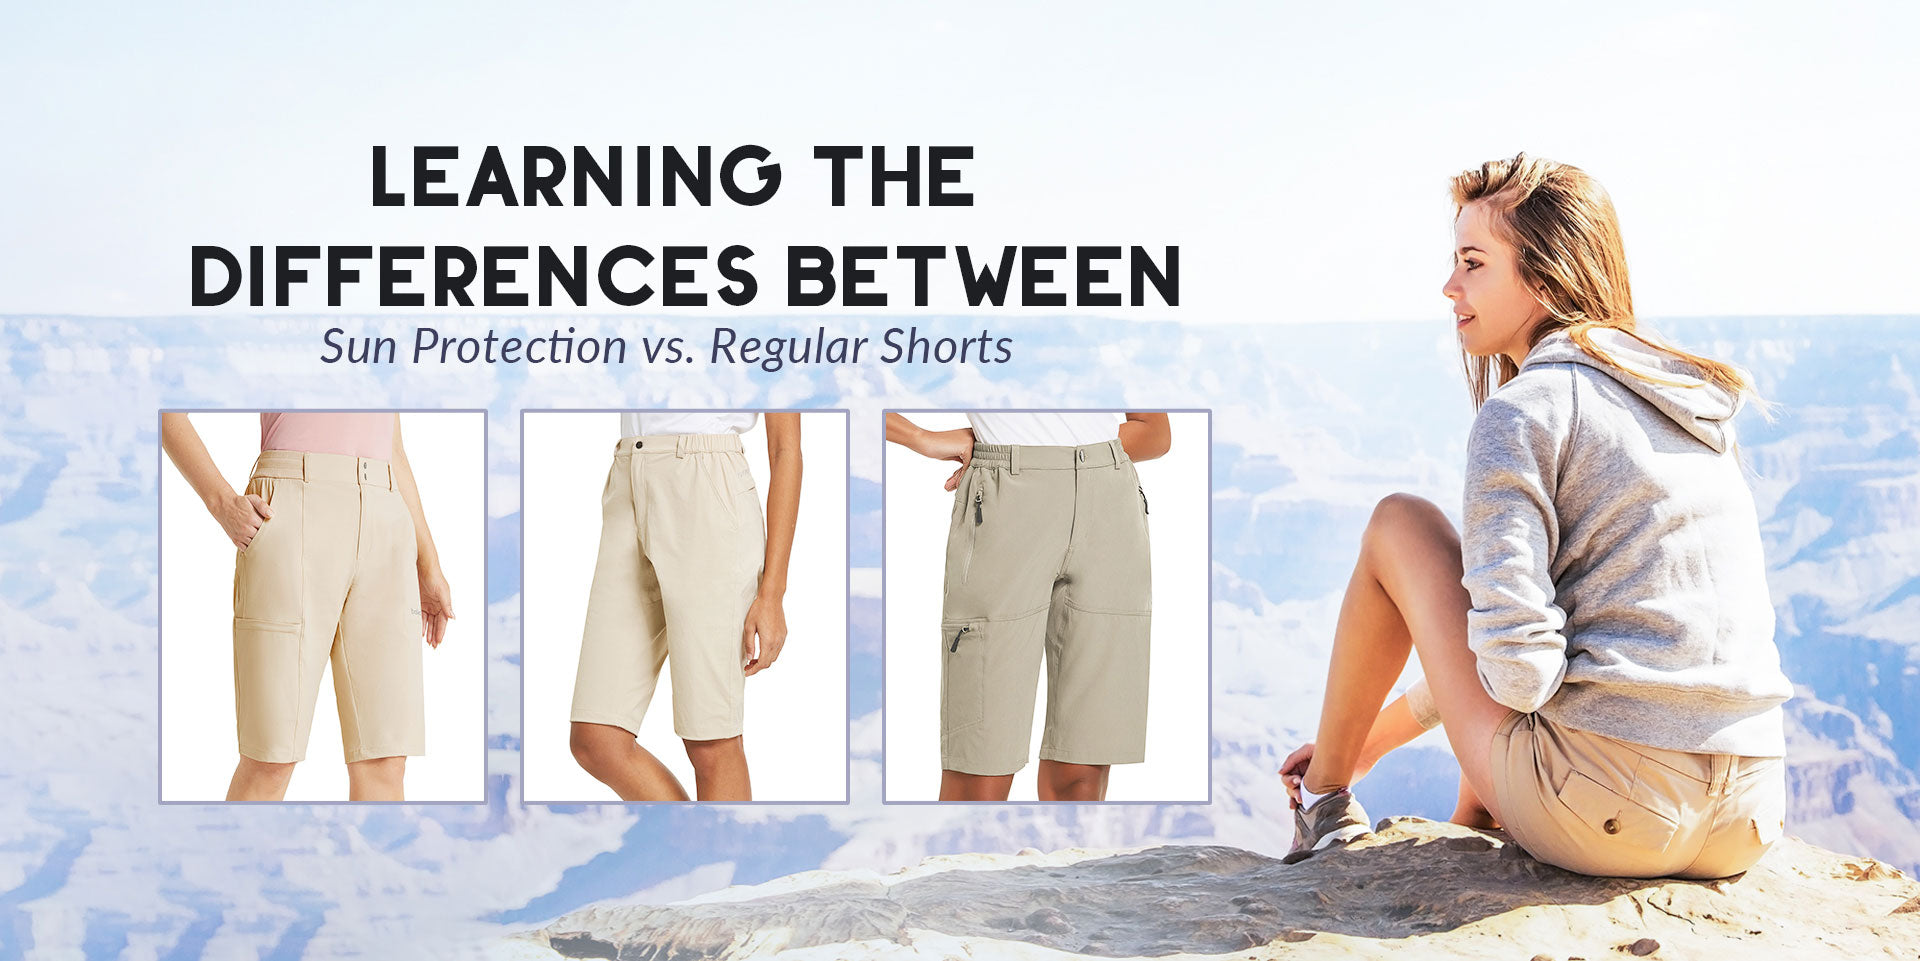 Learning the Differences Between Sun Protection vs. Regular Shorts